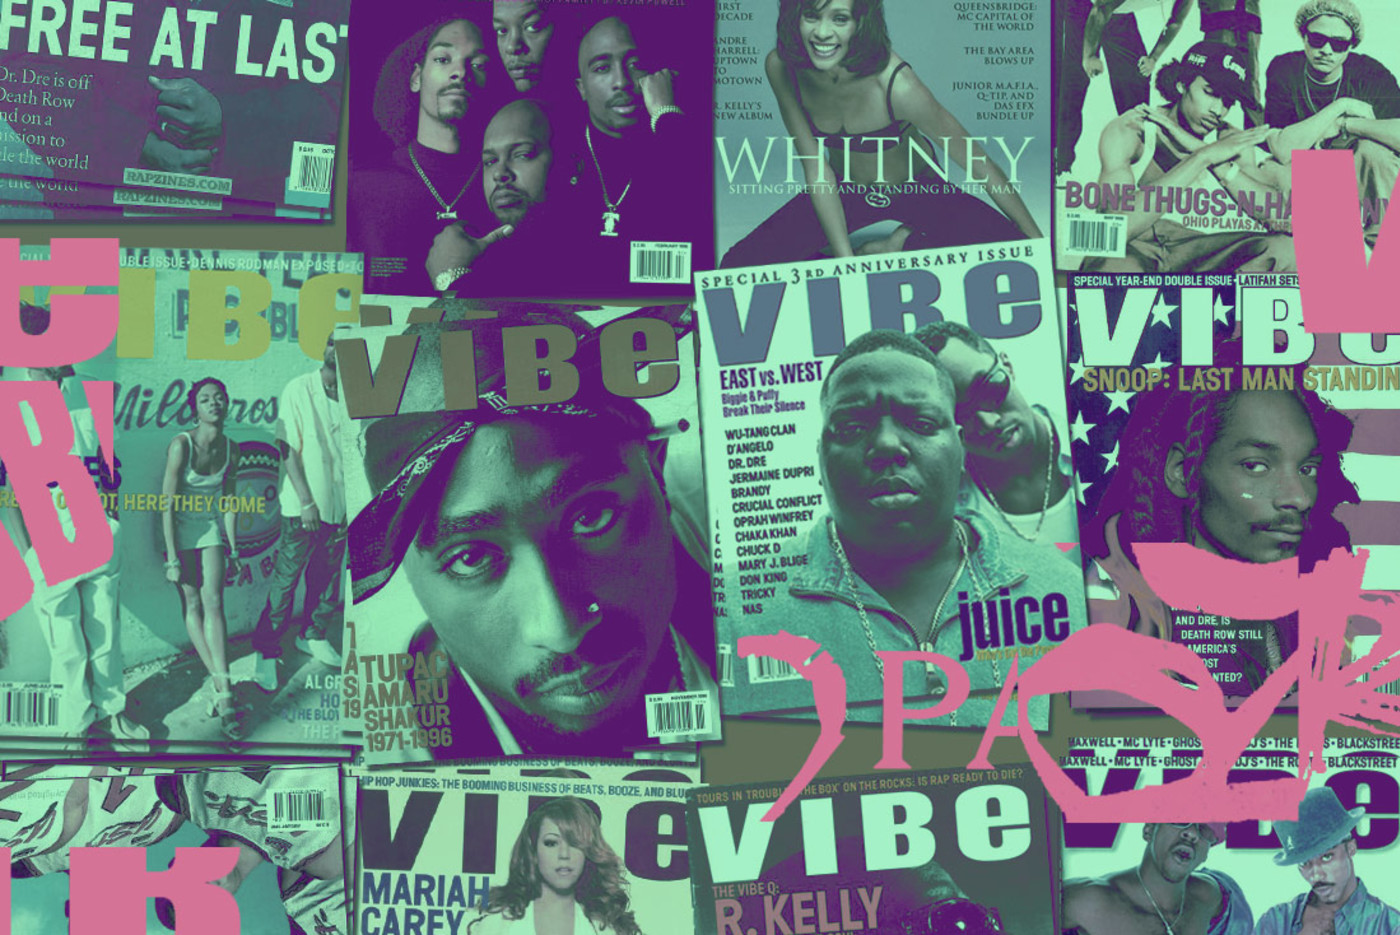 Feasibility Forstyrret frokost The Real Story Behind 'VIBE″s East vs. West Cover | Complex